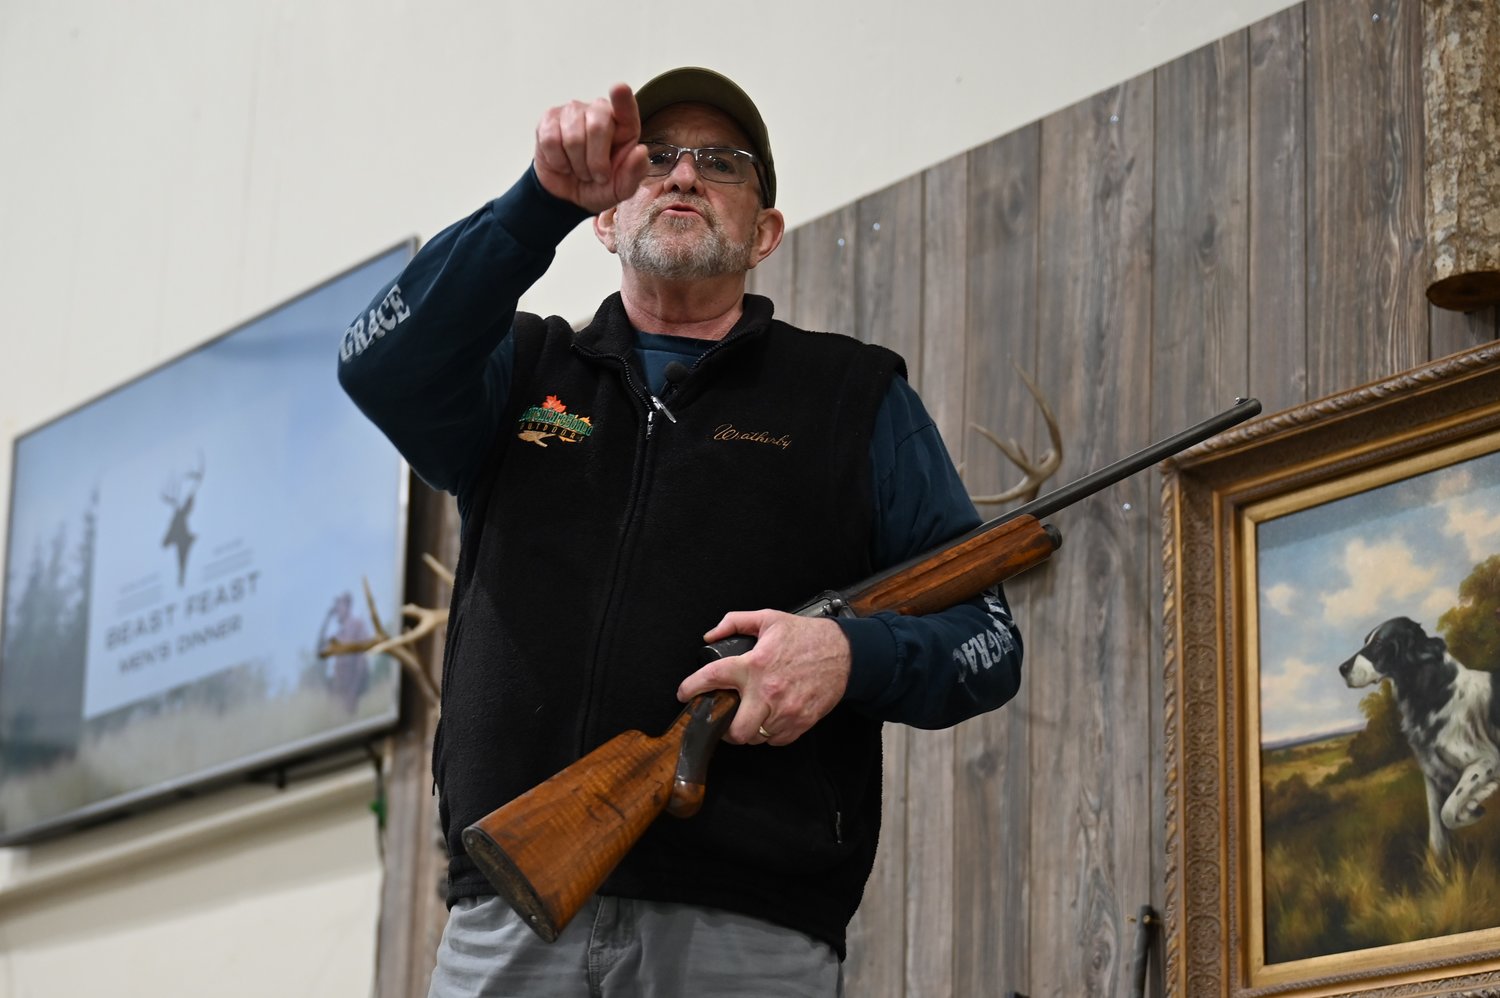 Outdoorsman Chuck McAlister shares the gospel with fellow hunters and fishermen on Friday, February 3, 2023, at a wild game dinner at Bethel Baptist Church in Omega. (Index/Roger Alford)